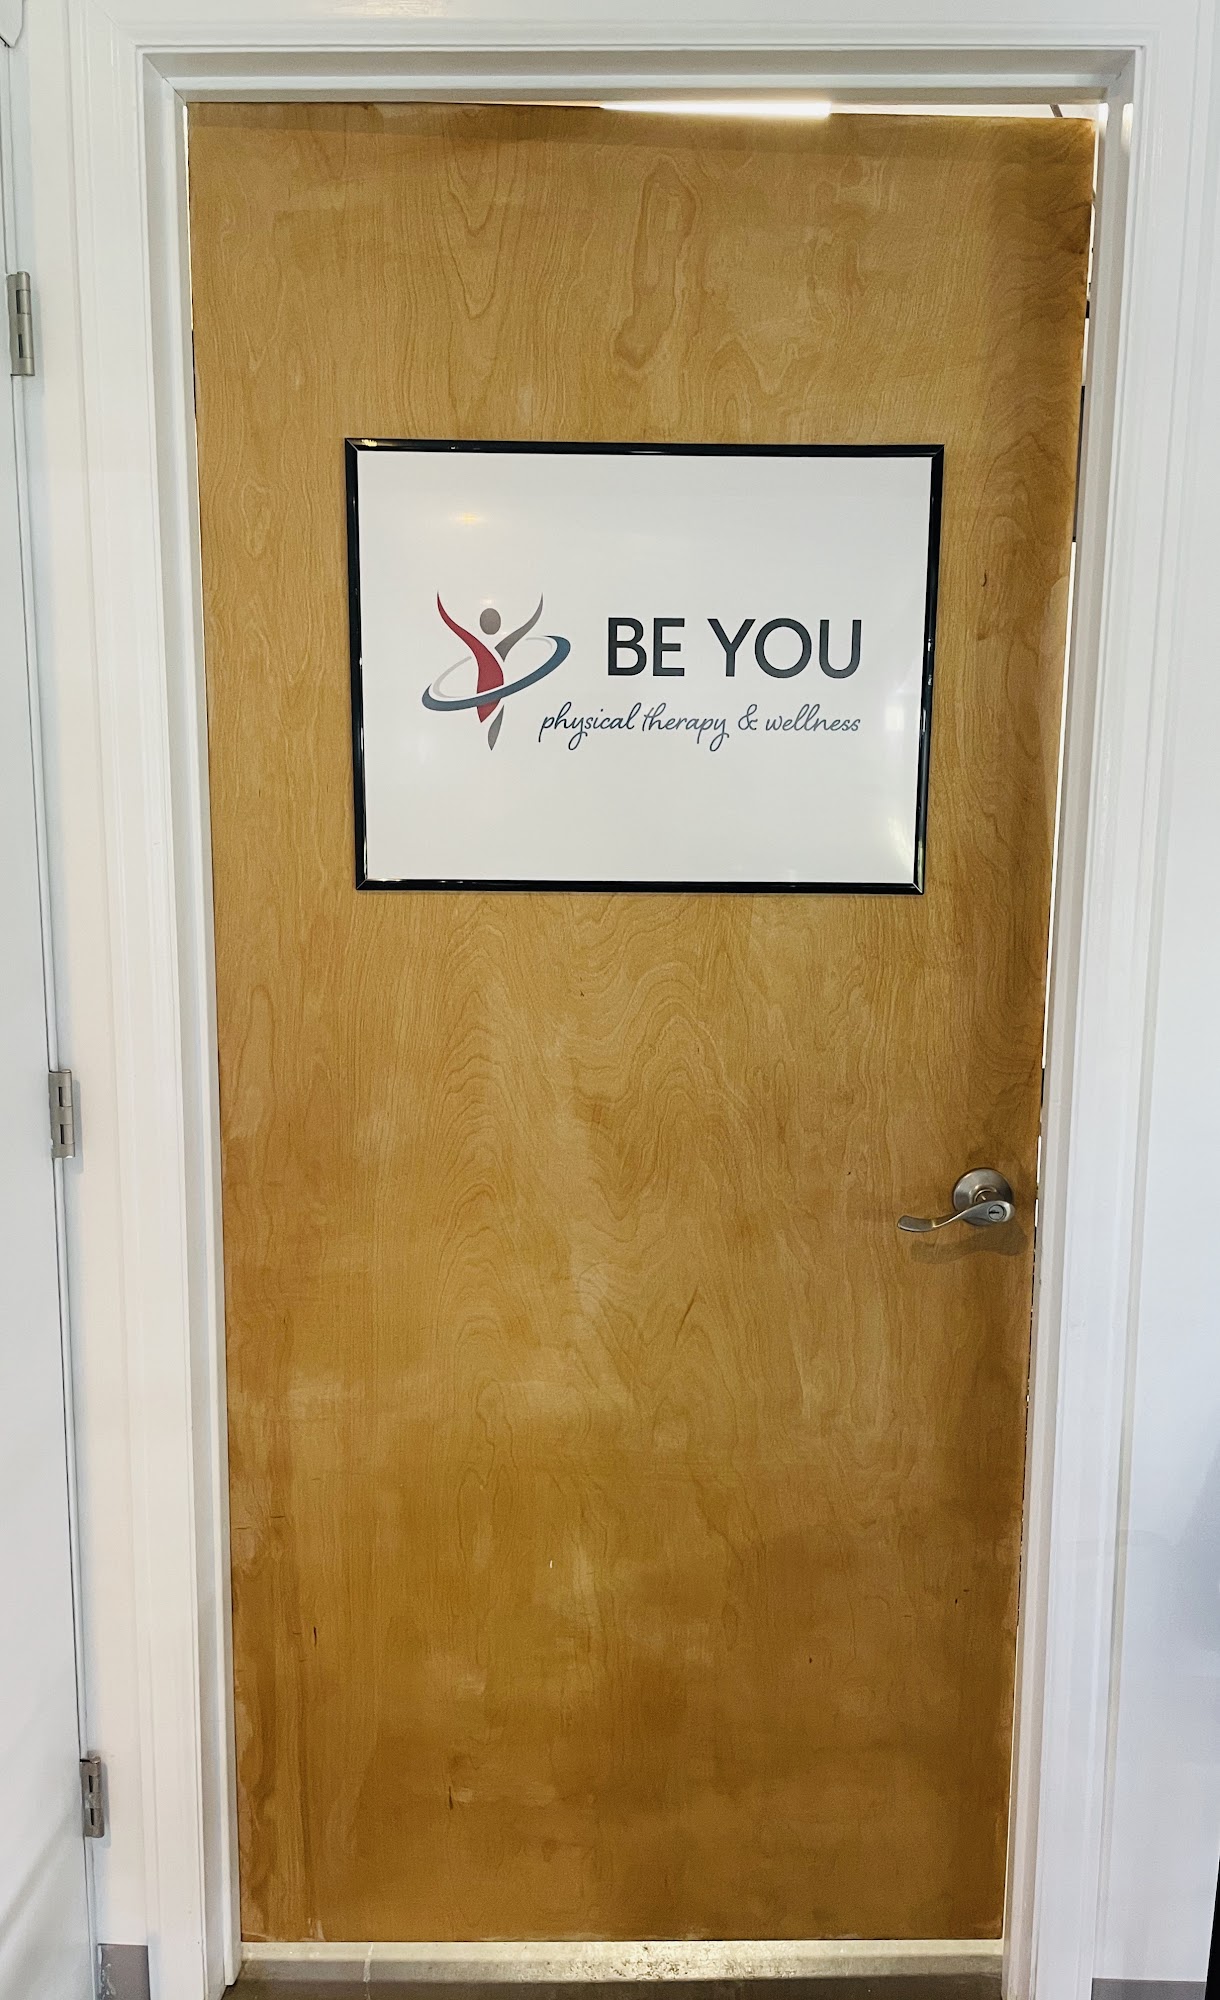 Be You Physical Therapy & Wellness